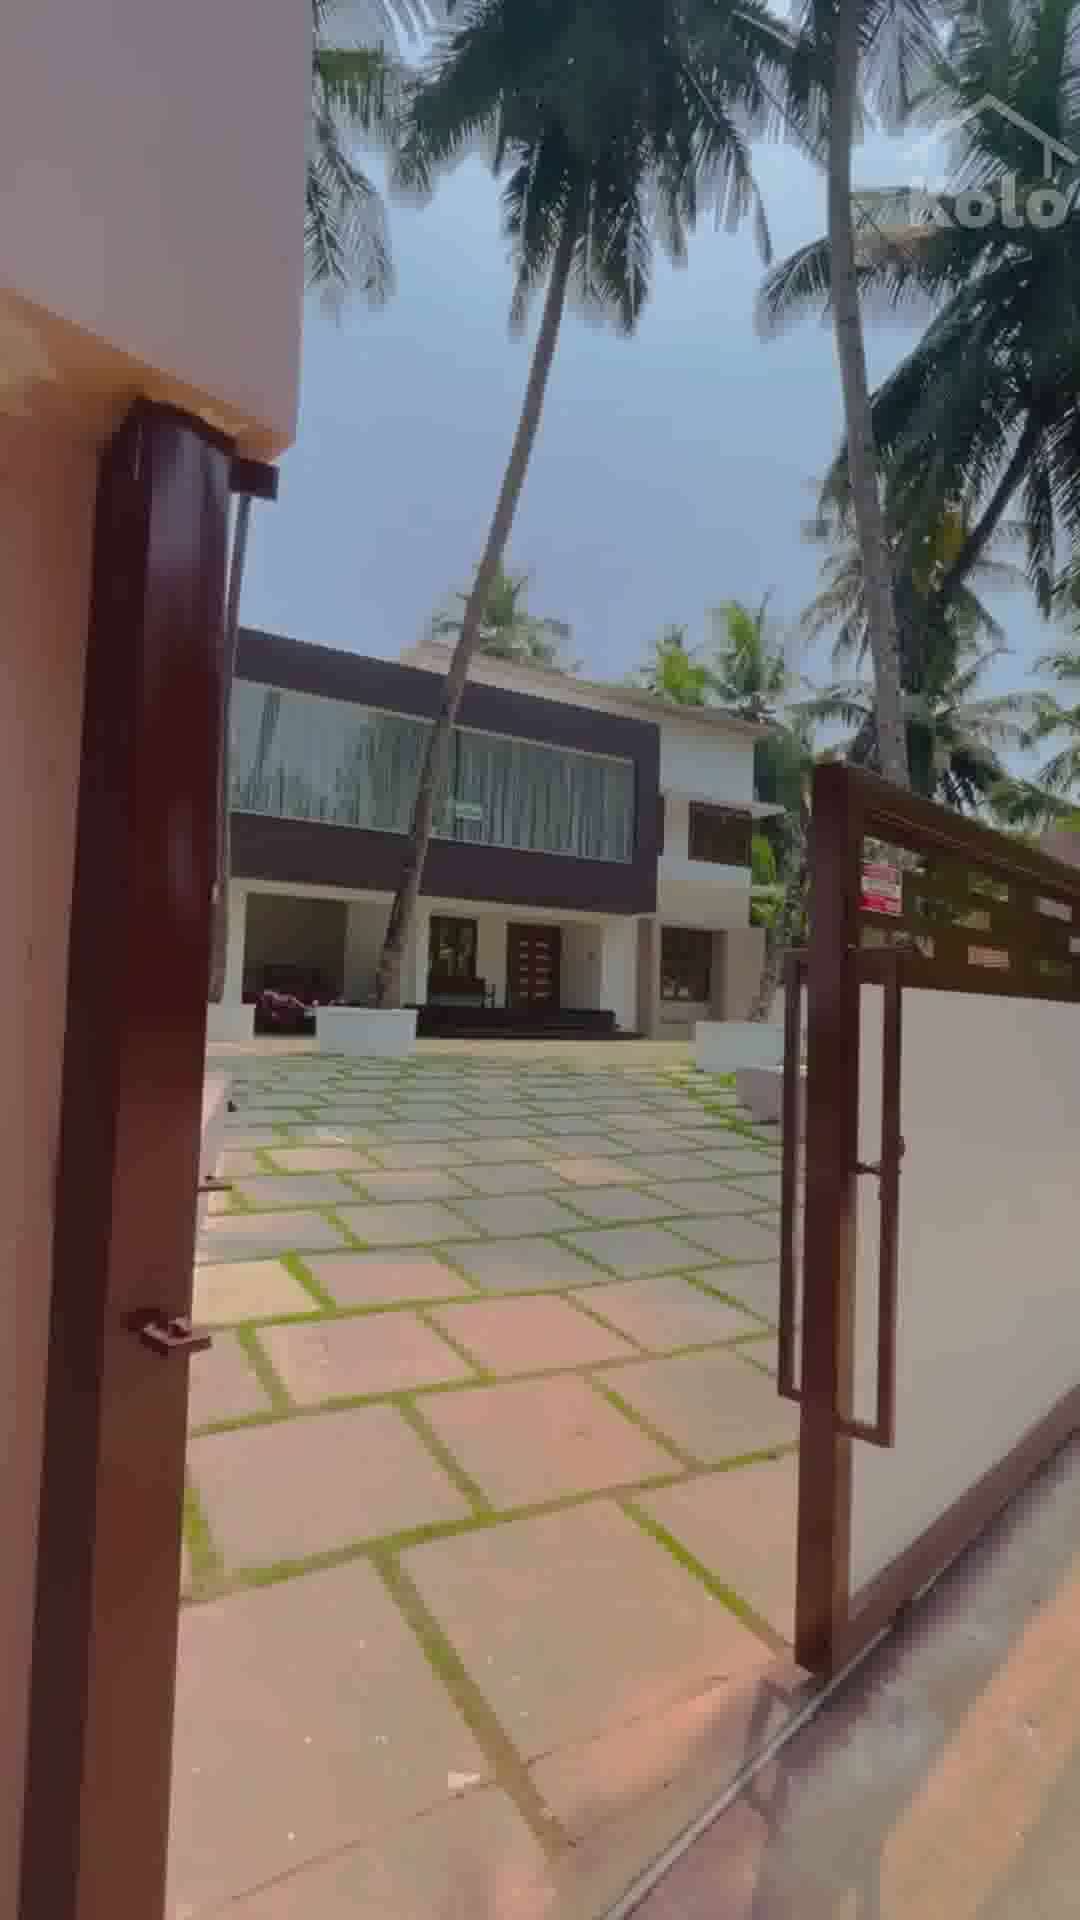 Sweet Home

@zehran_zyn
@fayaz_.fazz

Kolo - India’s Largest Home Construction Community :house:

#home #keralahomes #homedecor #homes #homestyling #kerala #homesweethome #keralaarchitecture #instareels #instareel #reelsinstagram #reelsvideo #reels #reelsindia #instagramreels #reelsinsta #reelsviral #reel #reelitfeelit #viral #trending #viralvideos #instagood #makeover #homedesign #videooftheday #architecture #contemporary #interiordesign